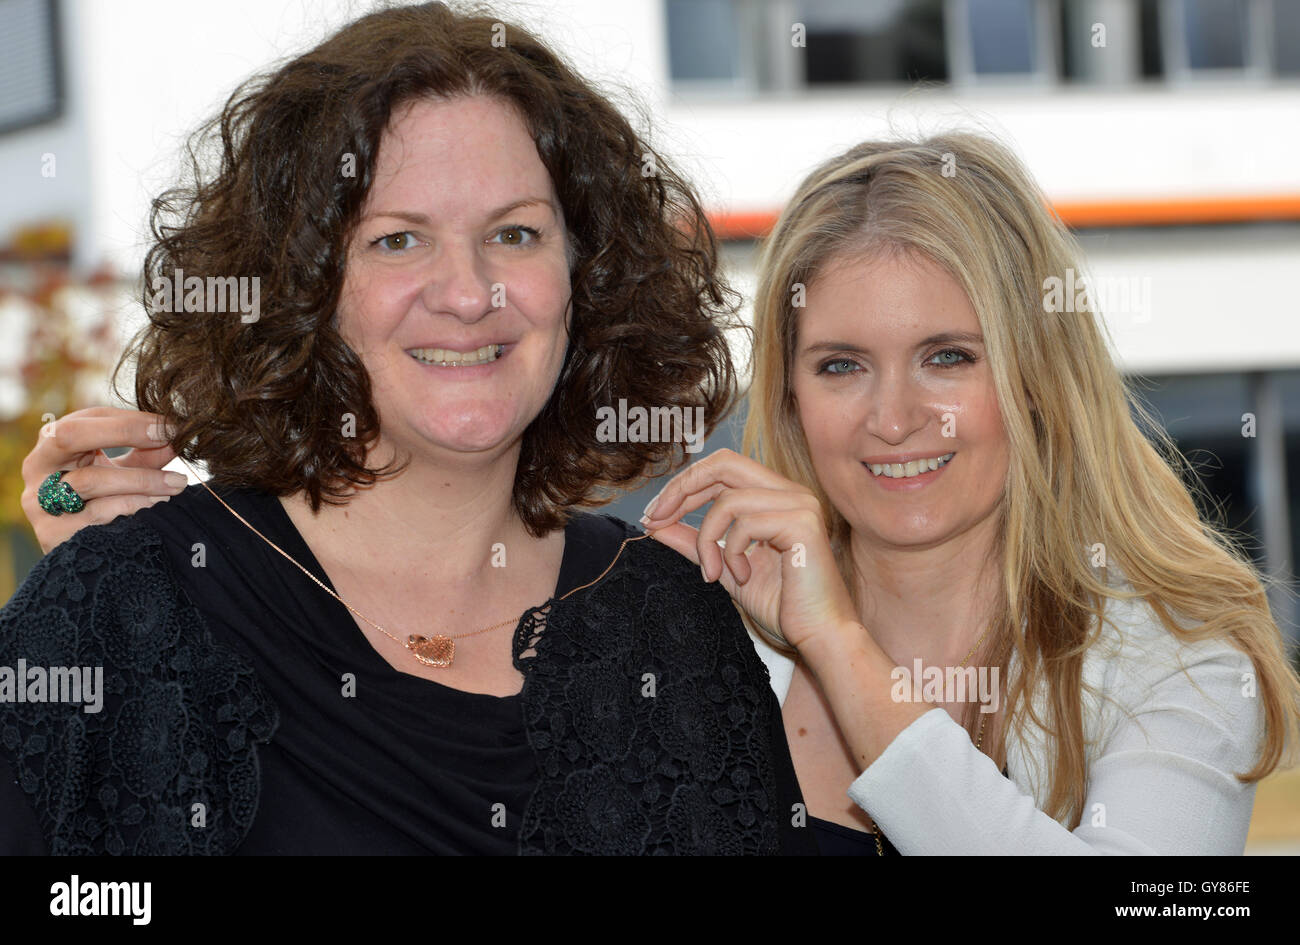 Birkenfeld, Germany. 17th Sep, 2016. Former model Felicity Gain (R) from London places the gold necklace on her life-saver, Siobhan Kirsten Mansfield, which she brought as a gift in Birkenfeld, Germany, 17 September 2016. In 2002, 44-year-old Mansfield from Trassem, Germany donated bone marrow for Felicity Gain, now 38, which saved her life. Phoot: HARALD TITTEL/dpa/Alamy Live News Stock Photo